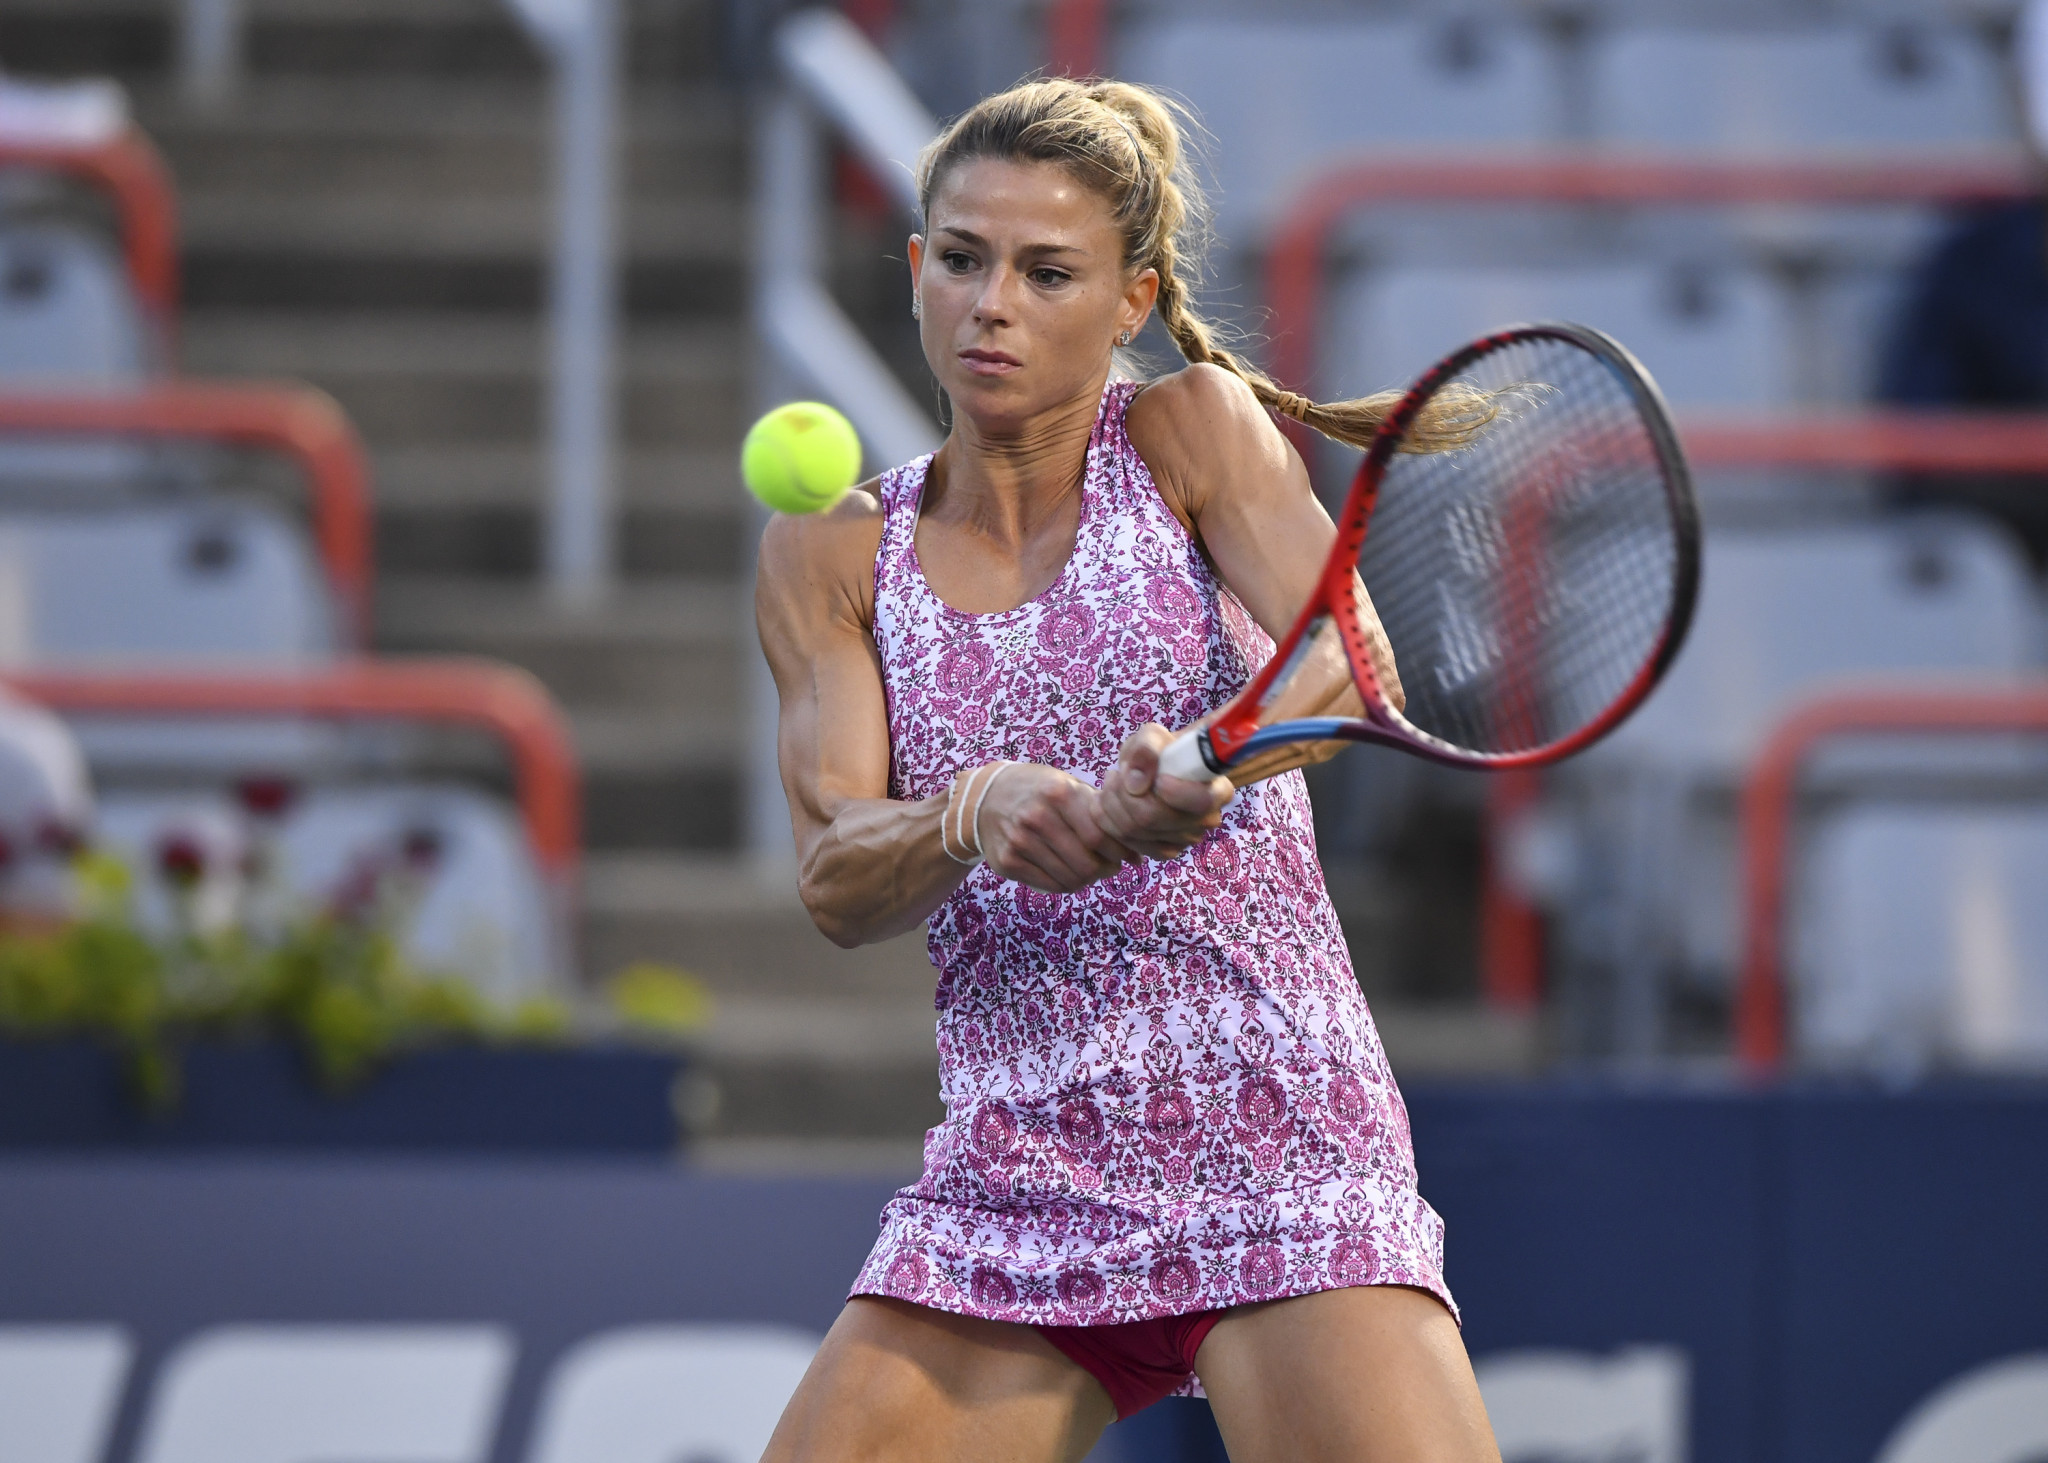 Camila Giorgi is currently the highest-ranked Italian player on the WTA circuit ©Getty Images